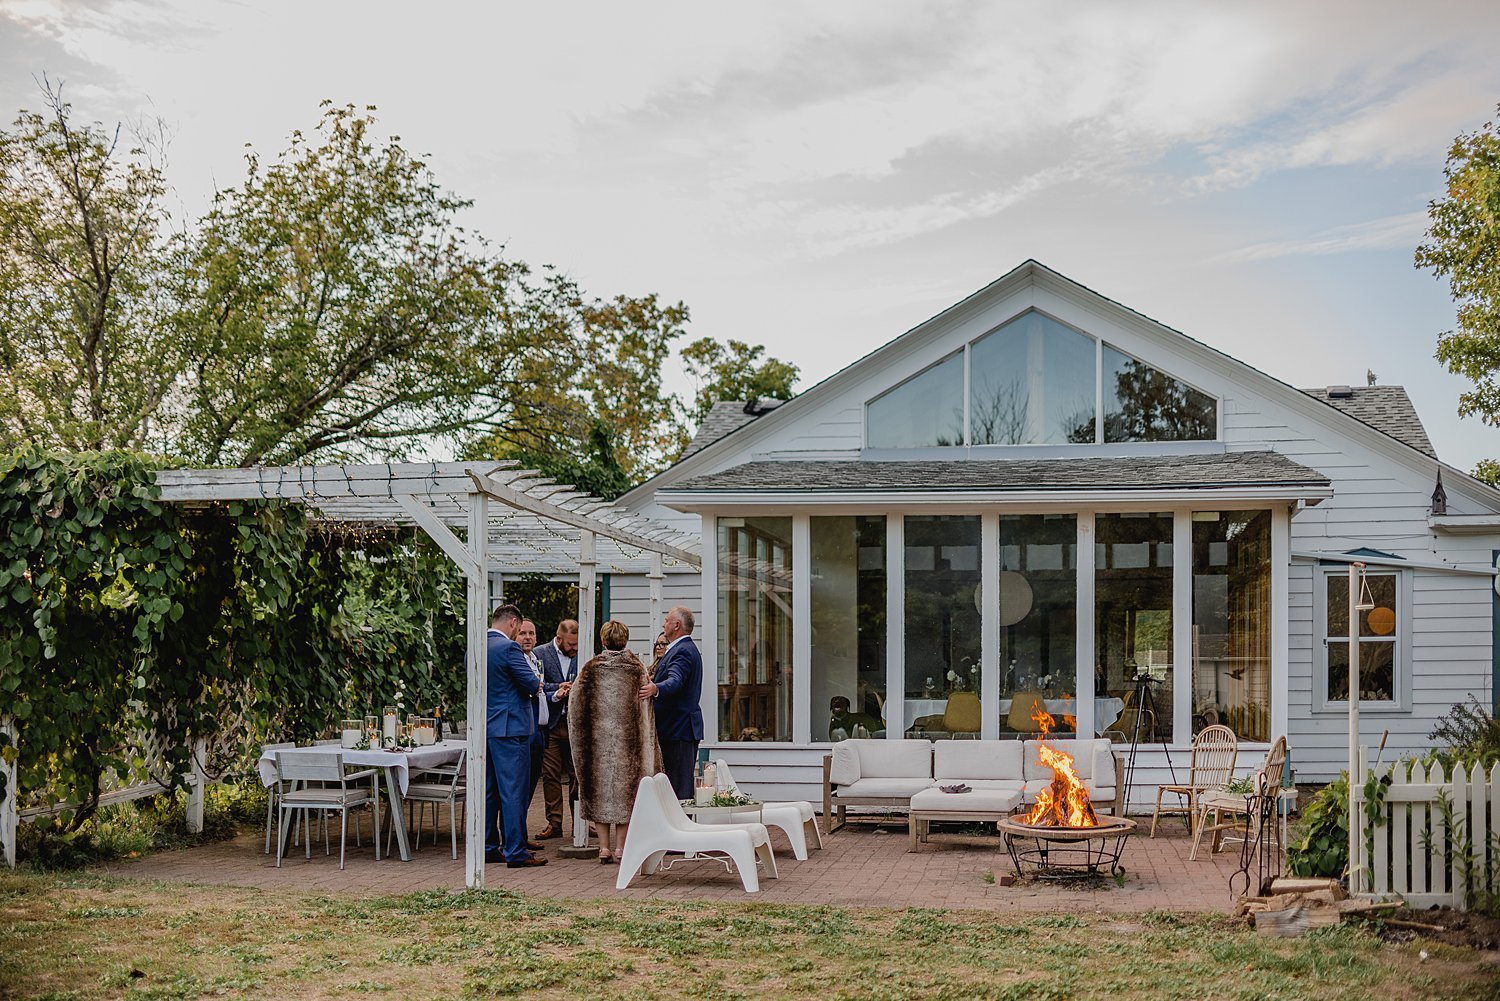 An Intimate Elopement at an Airbnb in Prince Edward County | Prince Edward County Wedding Photographer | Holly McMurter Photographs_0061.jpg